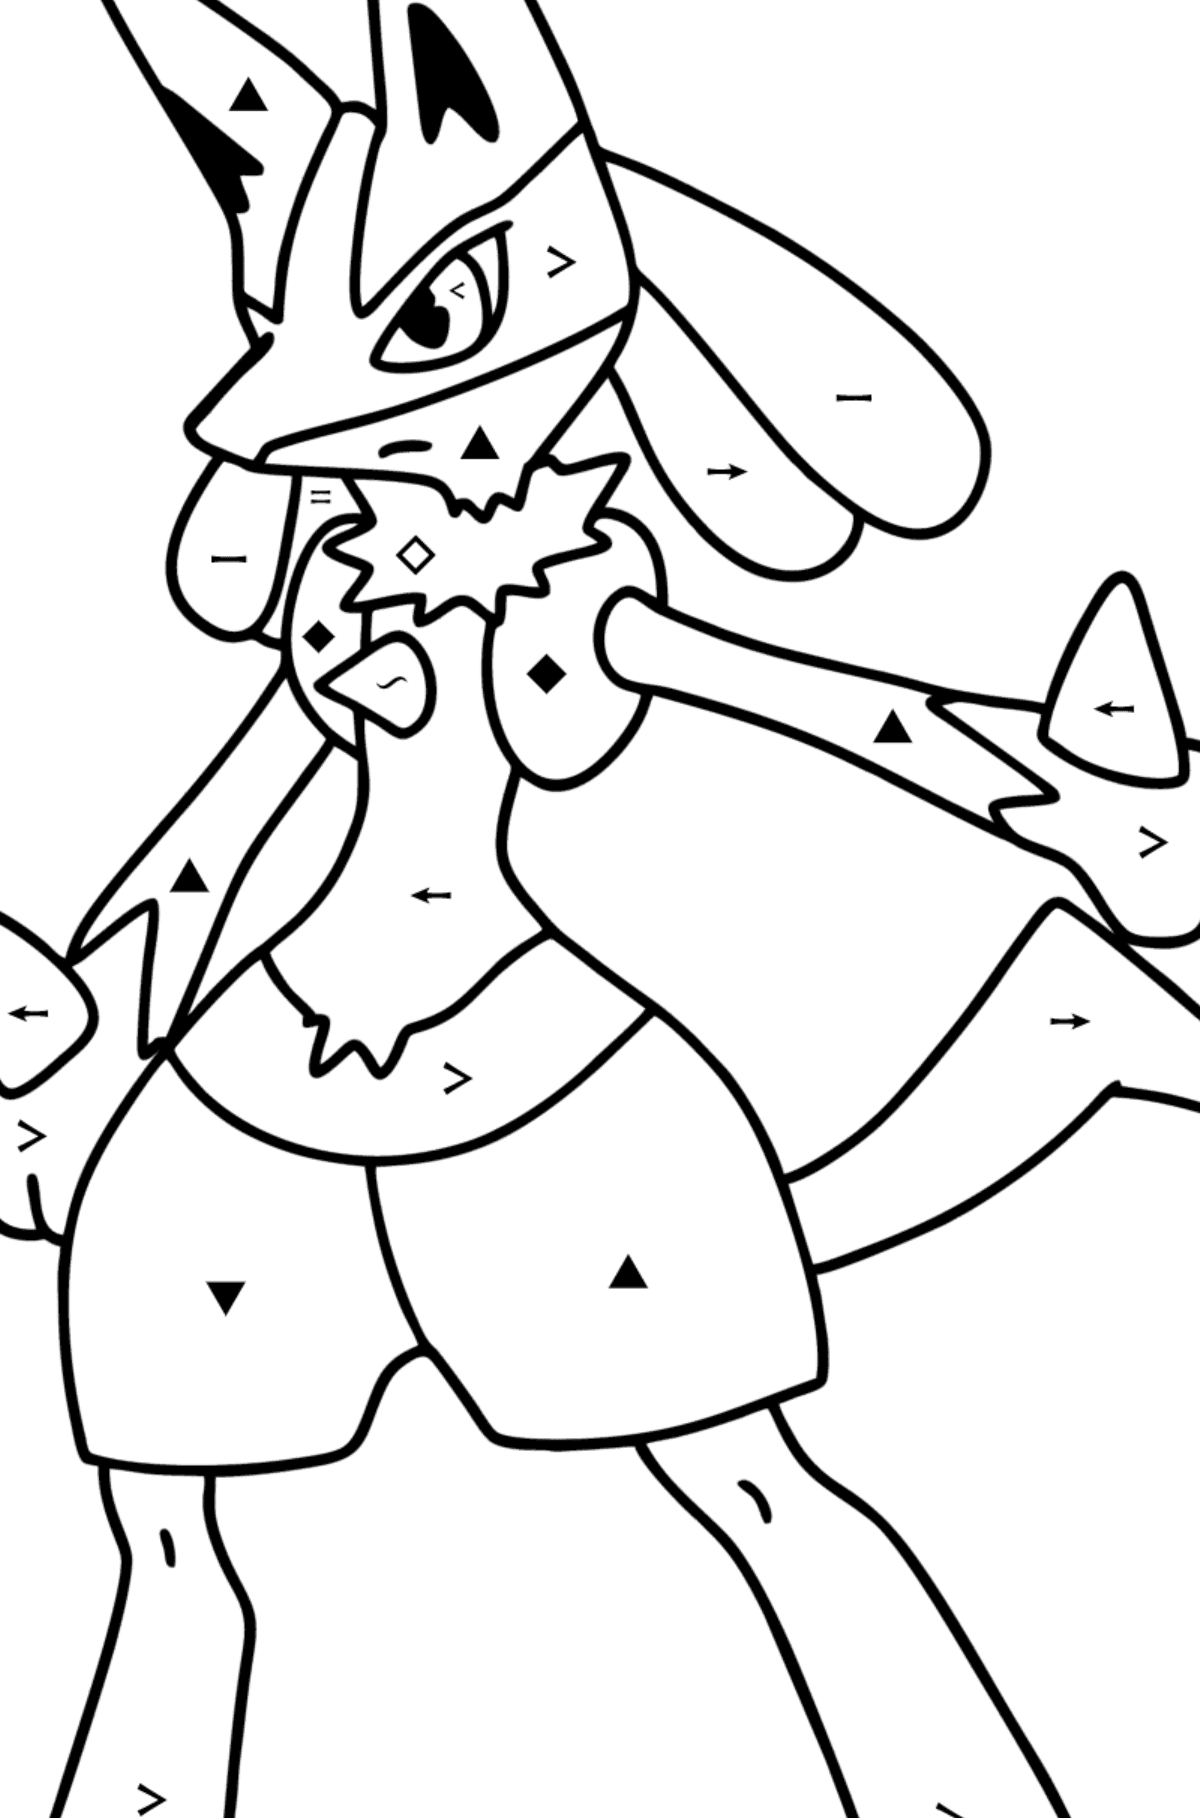 Coloring page Pokemon Go Lucario - Coloring by Symbols for Kids